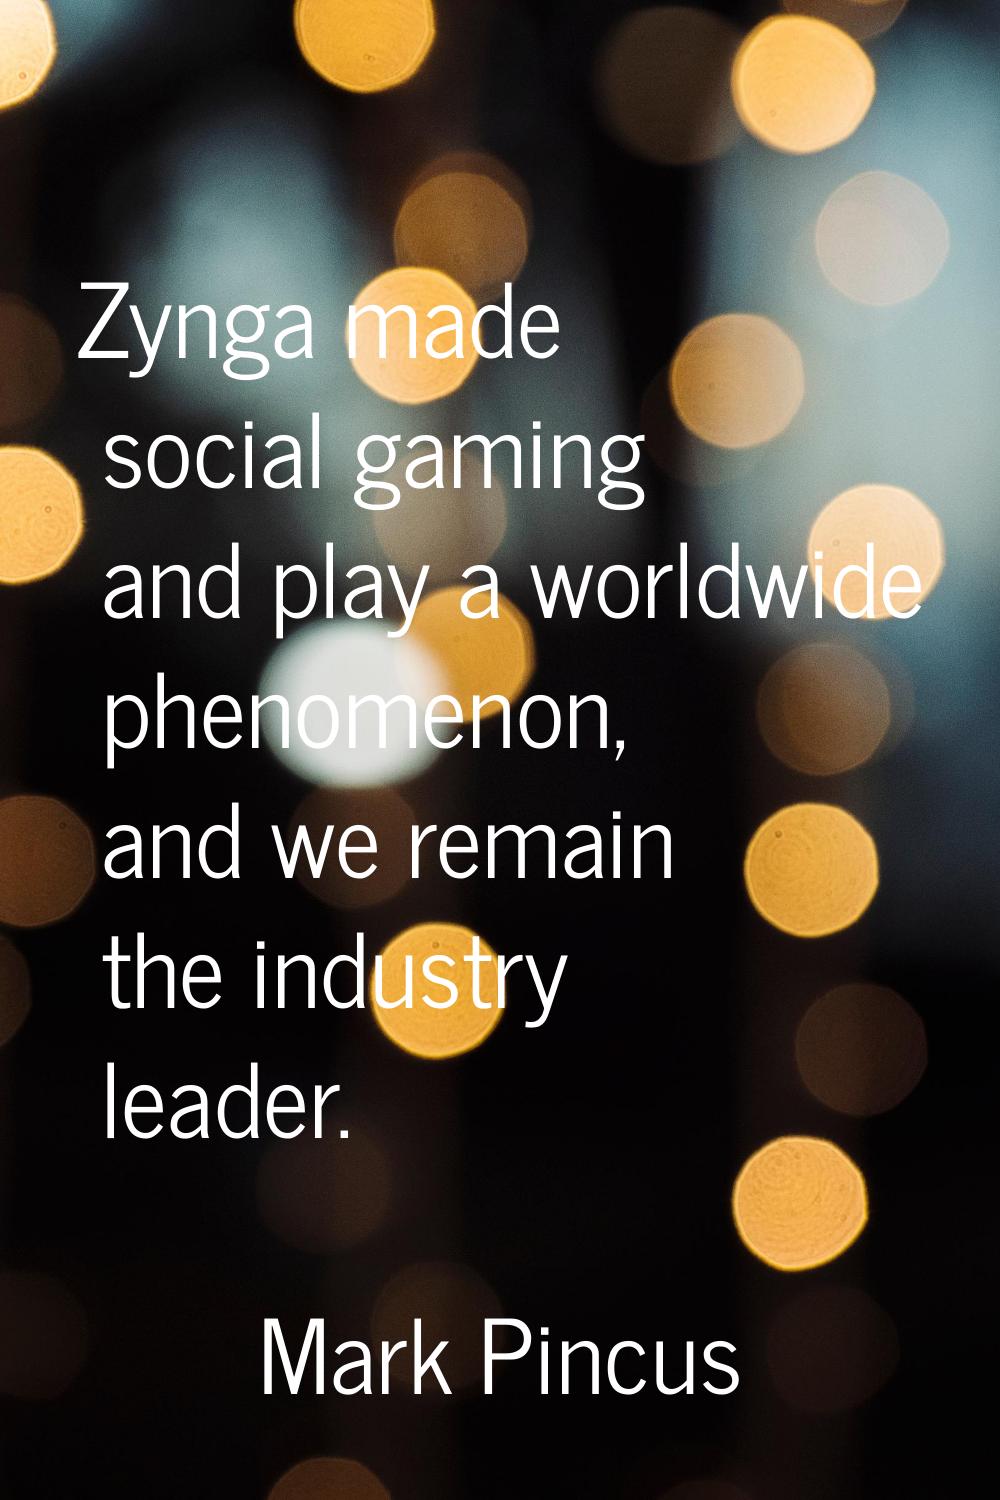 Zynga made social gaming and play a worldwide phenomenon, and we remain the industry leader.